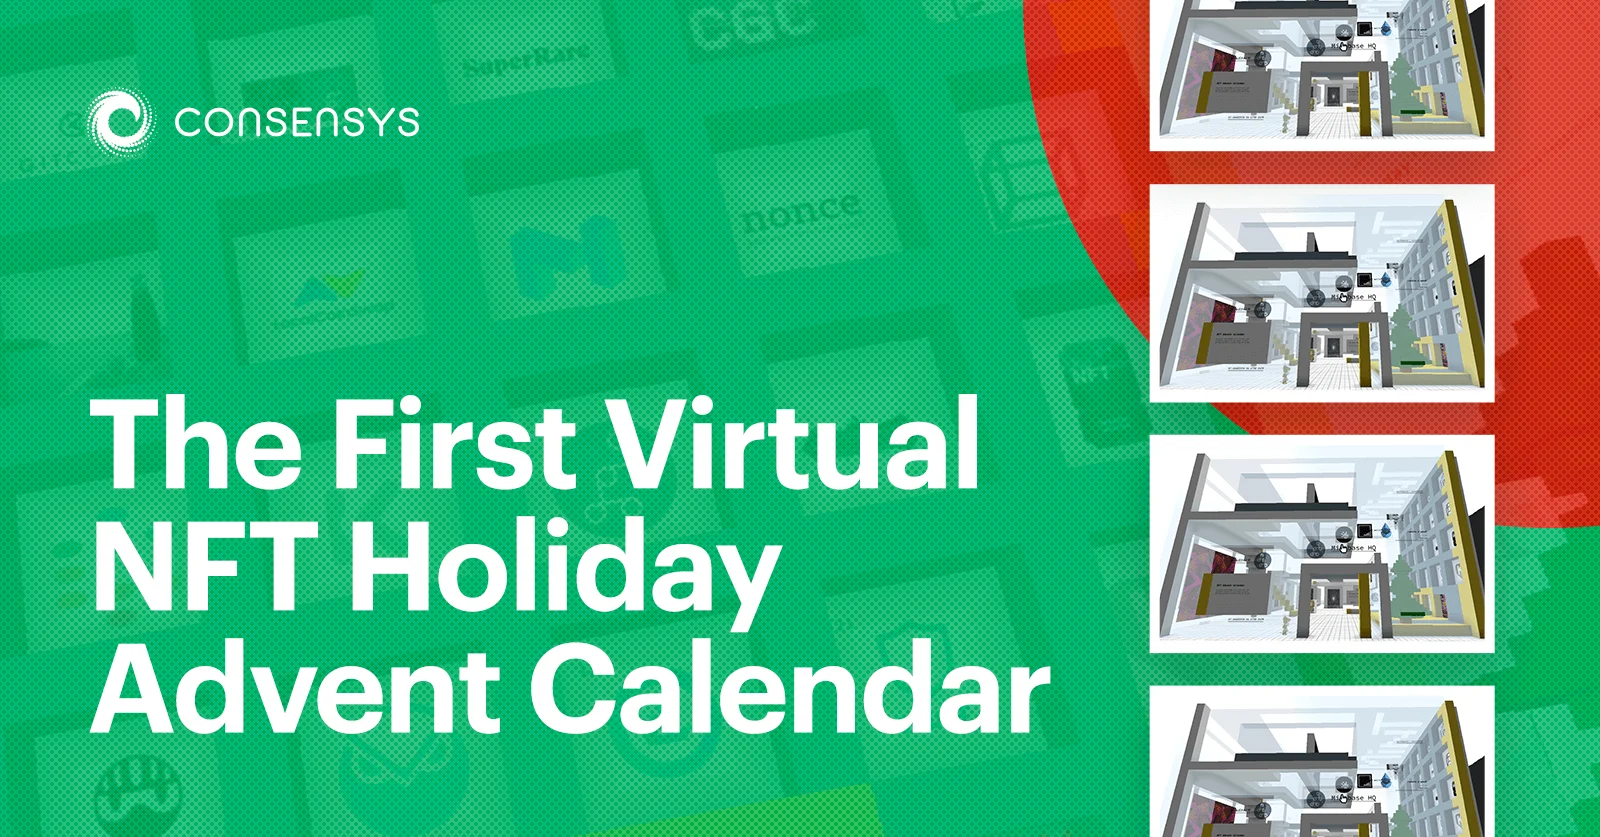 Image: The First Virtual NFT Holiday Advent Calendar